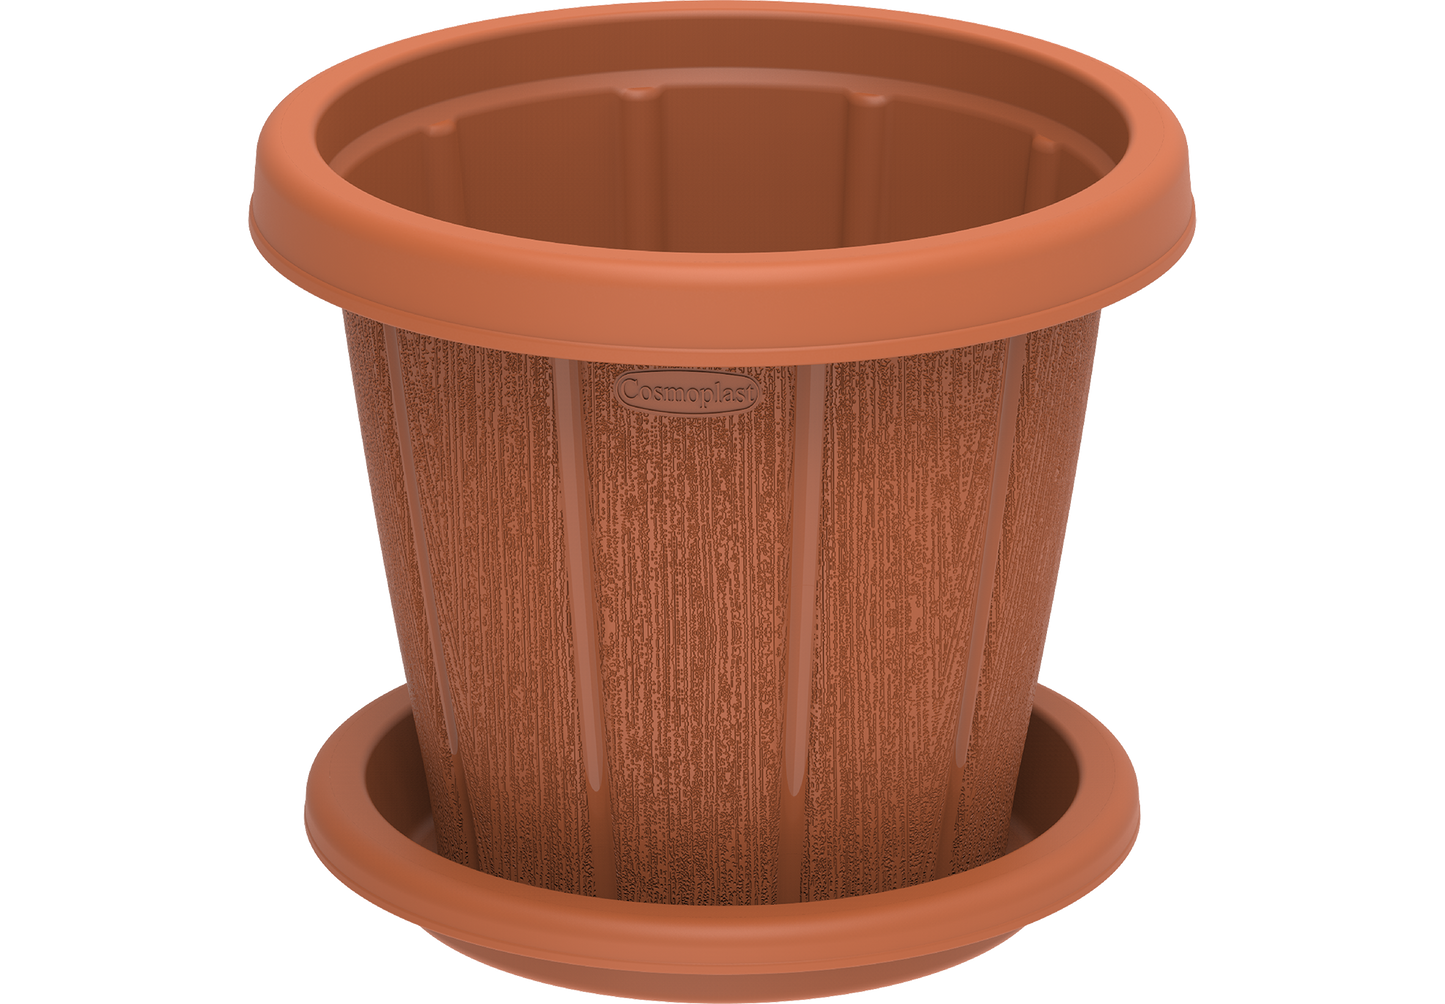  8 inch Flowerpot with Tray